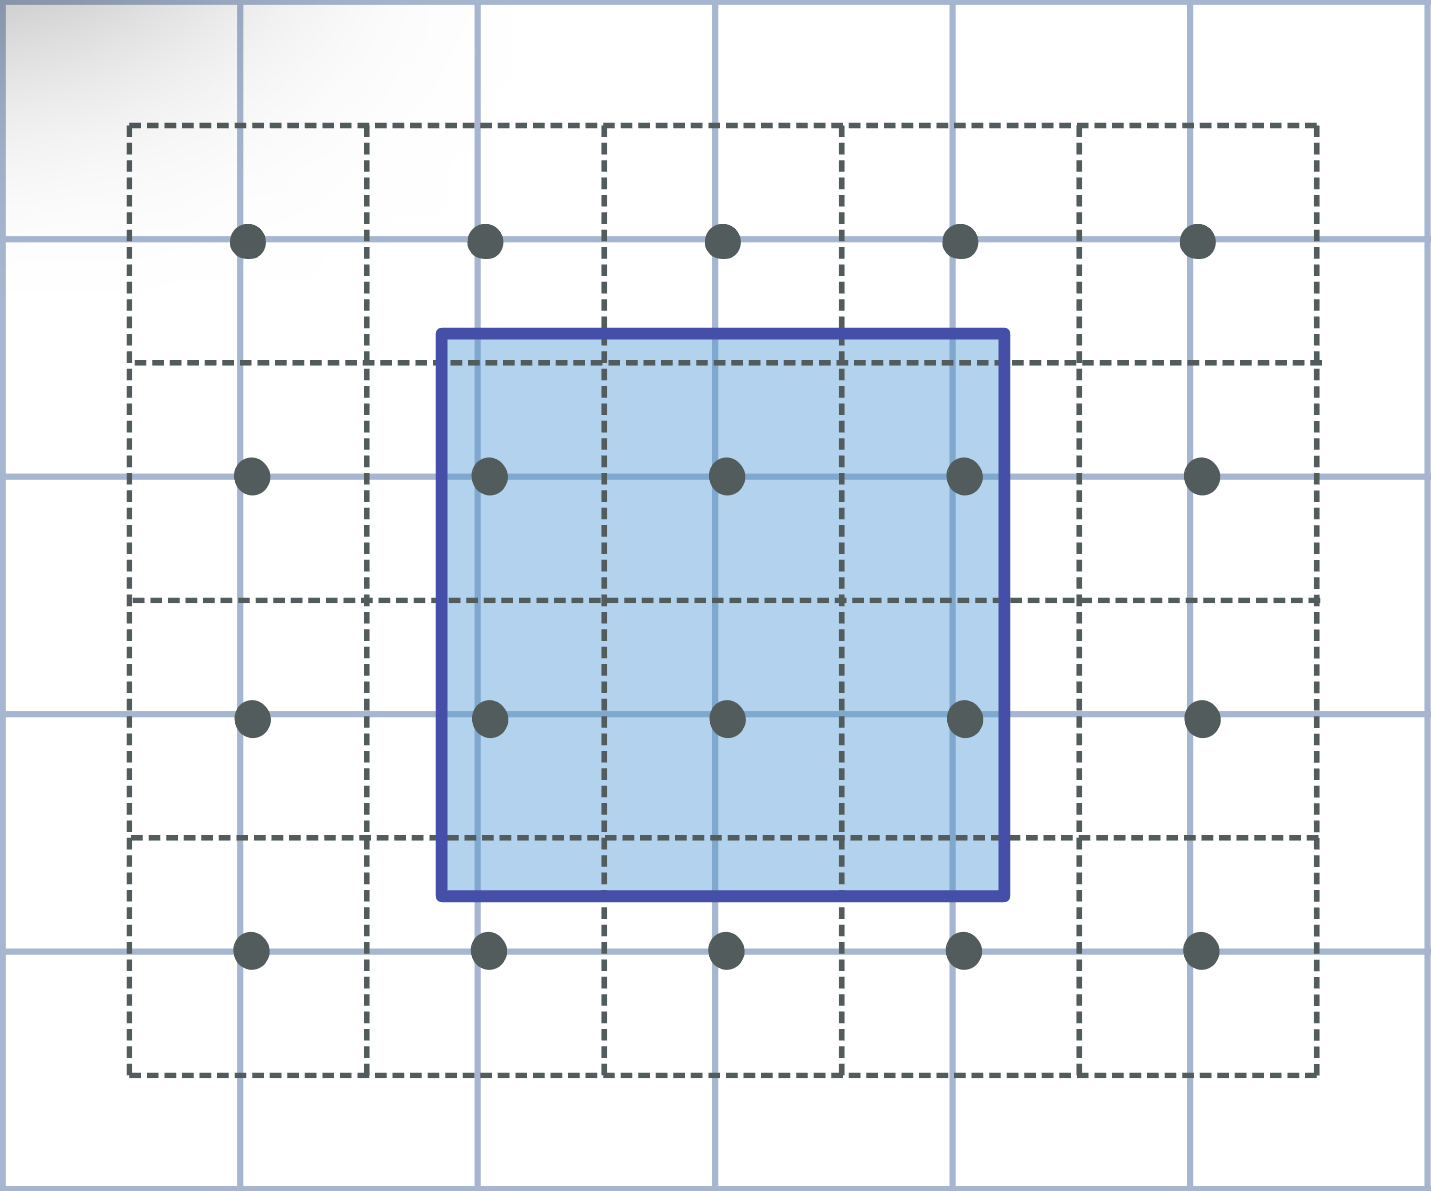 Nearest Neighbour Interpolation. Rog coil in blue, grid points as grey points, and the dotted lines are the squares around each grid point